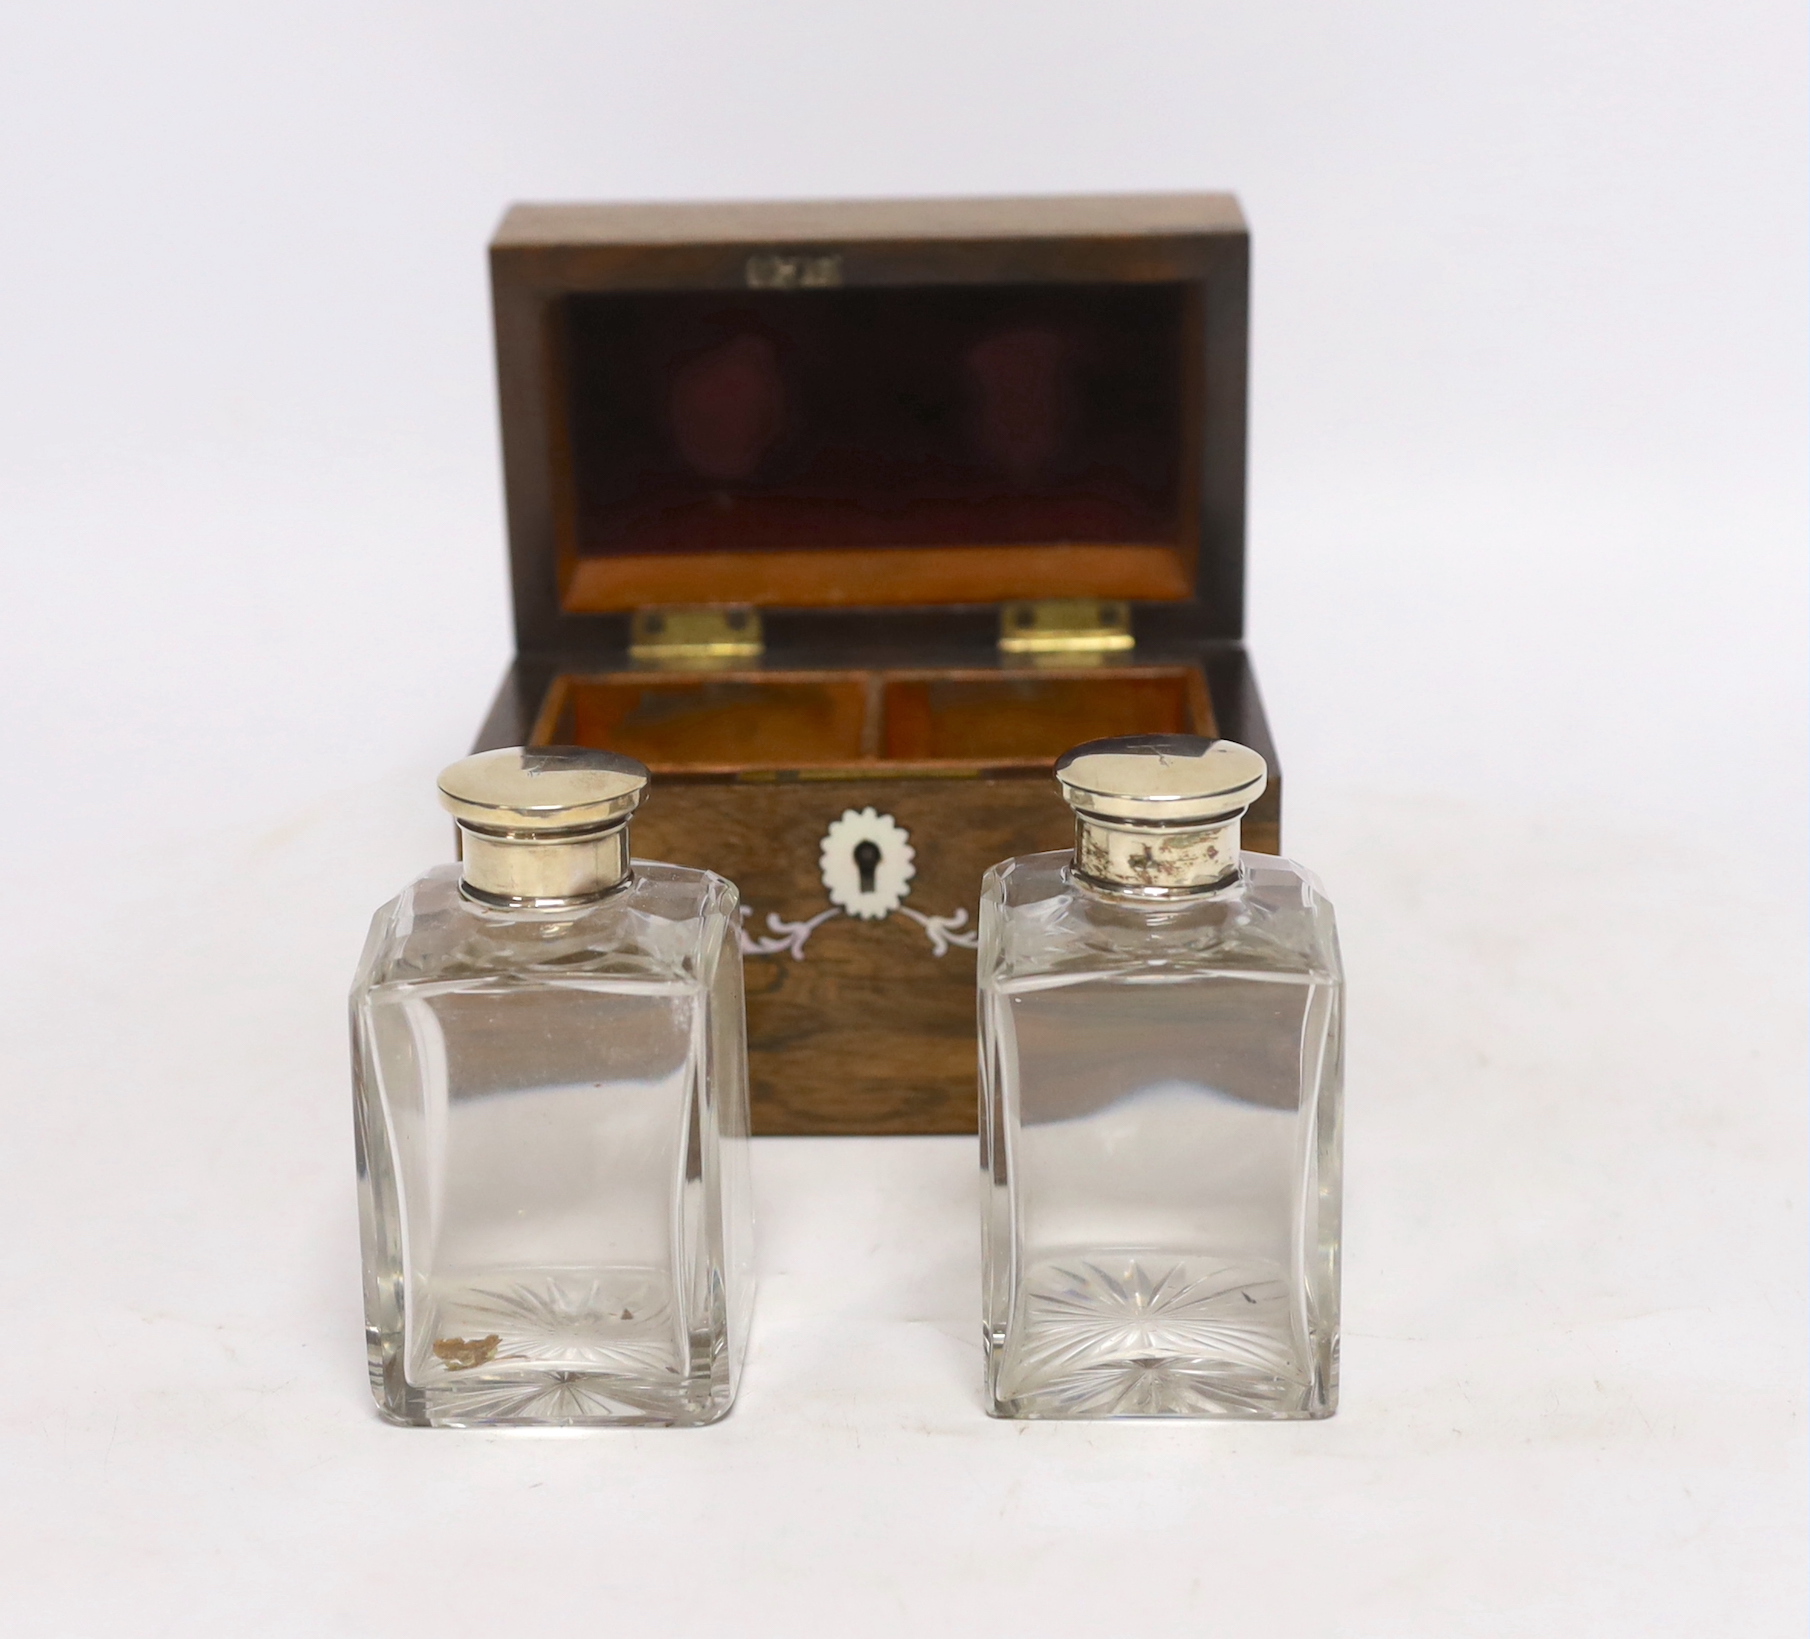 A 19th century mother-of-pearl inlaid rosewood travelling toilet box with two white metal mounted bottles, 14cm wide